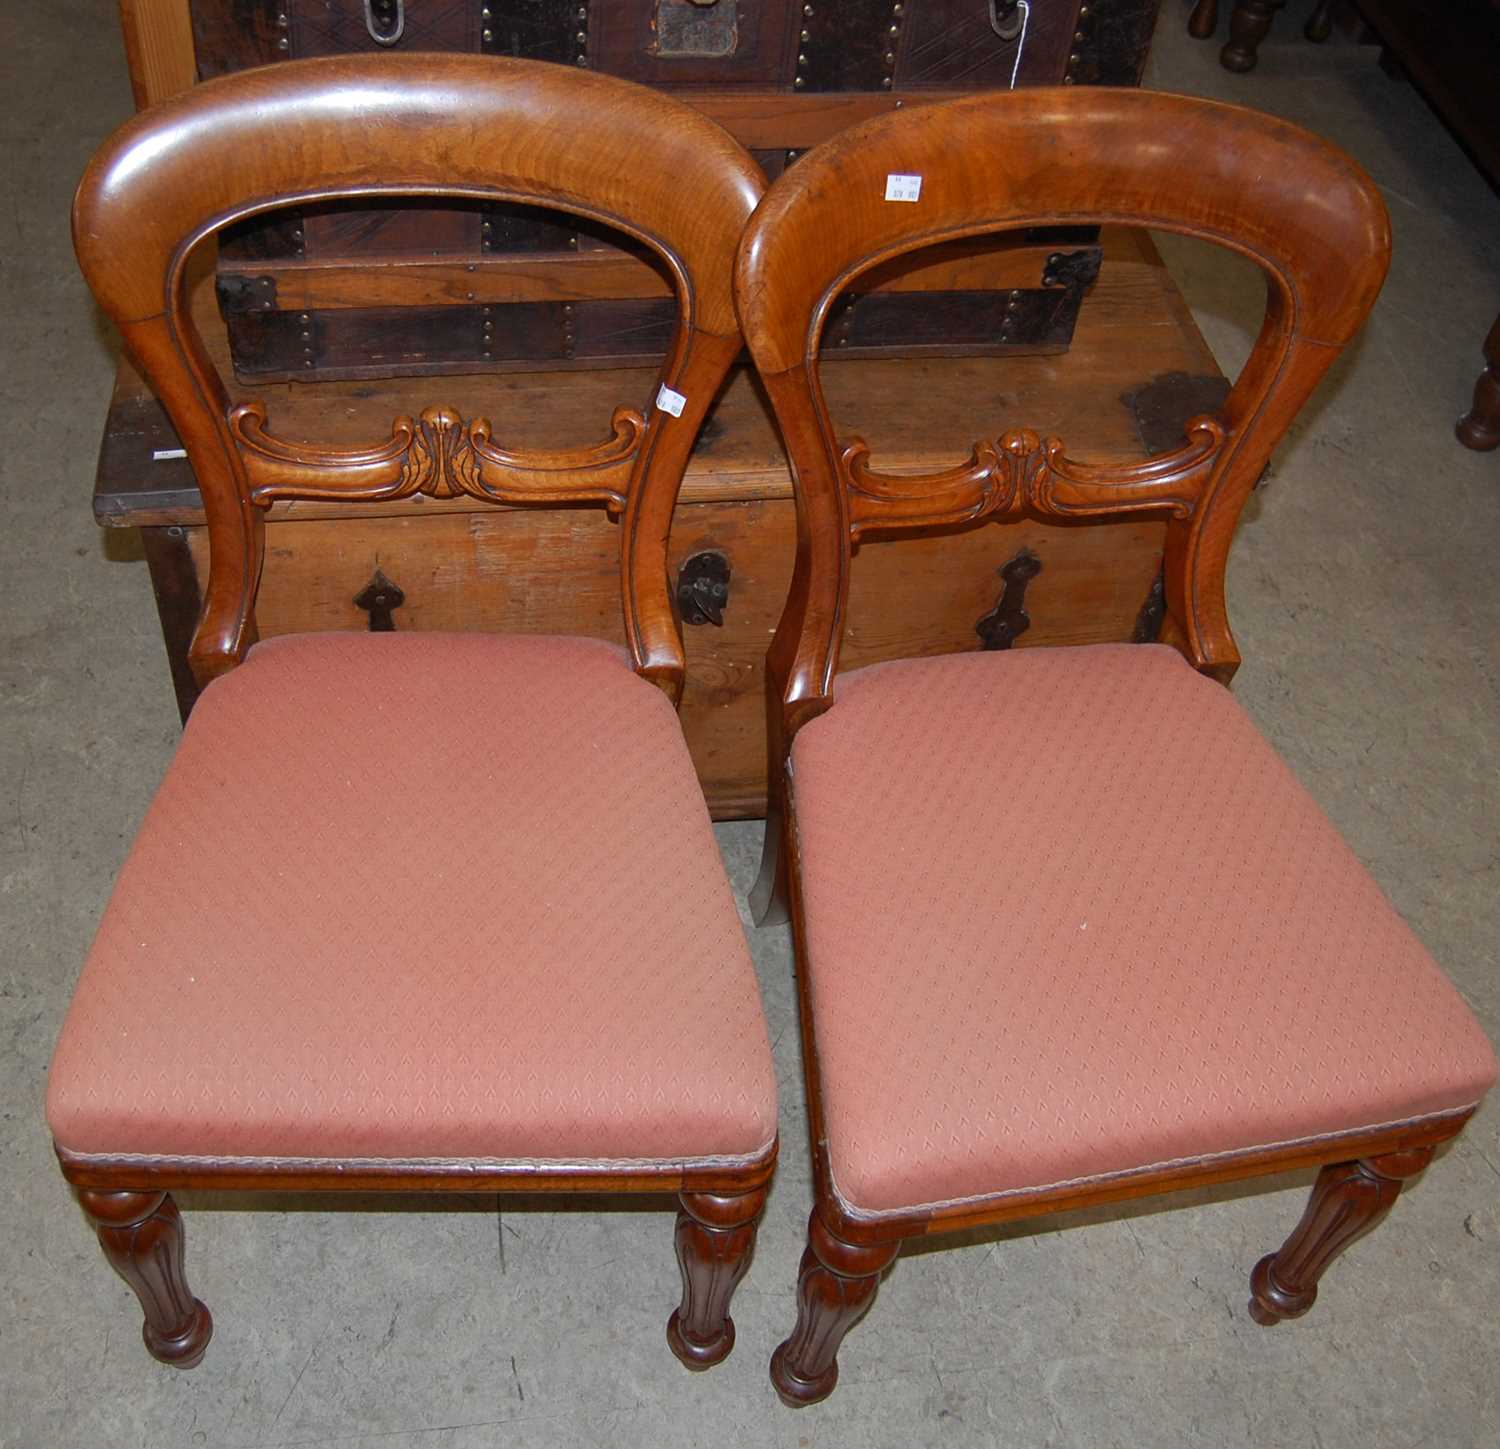 Two pairs of Victorian mahogany balloon back chairs, all with corresponding upholstered seats - Image 2 of 2